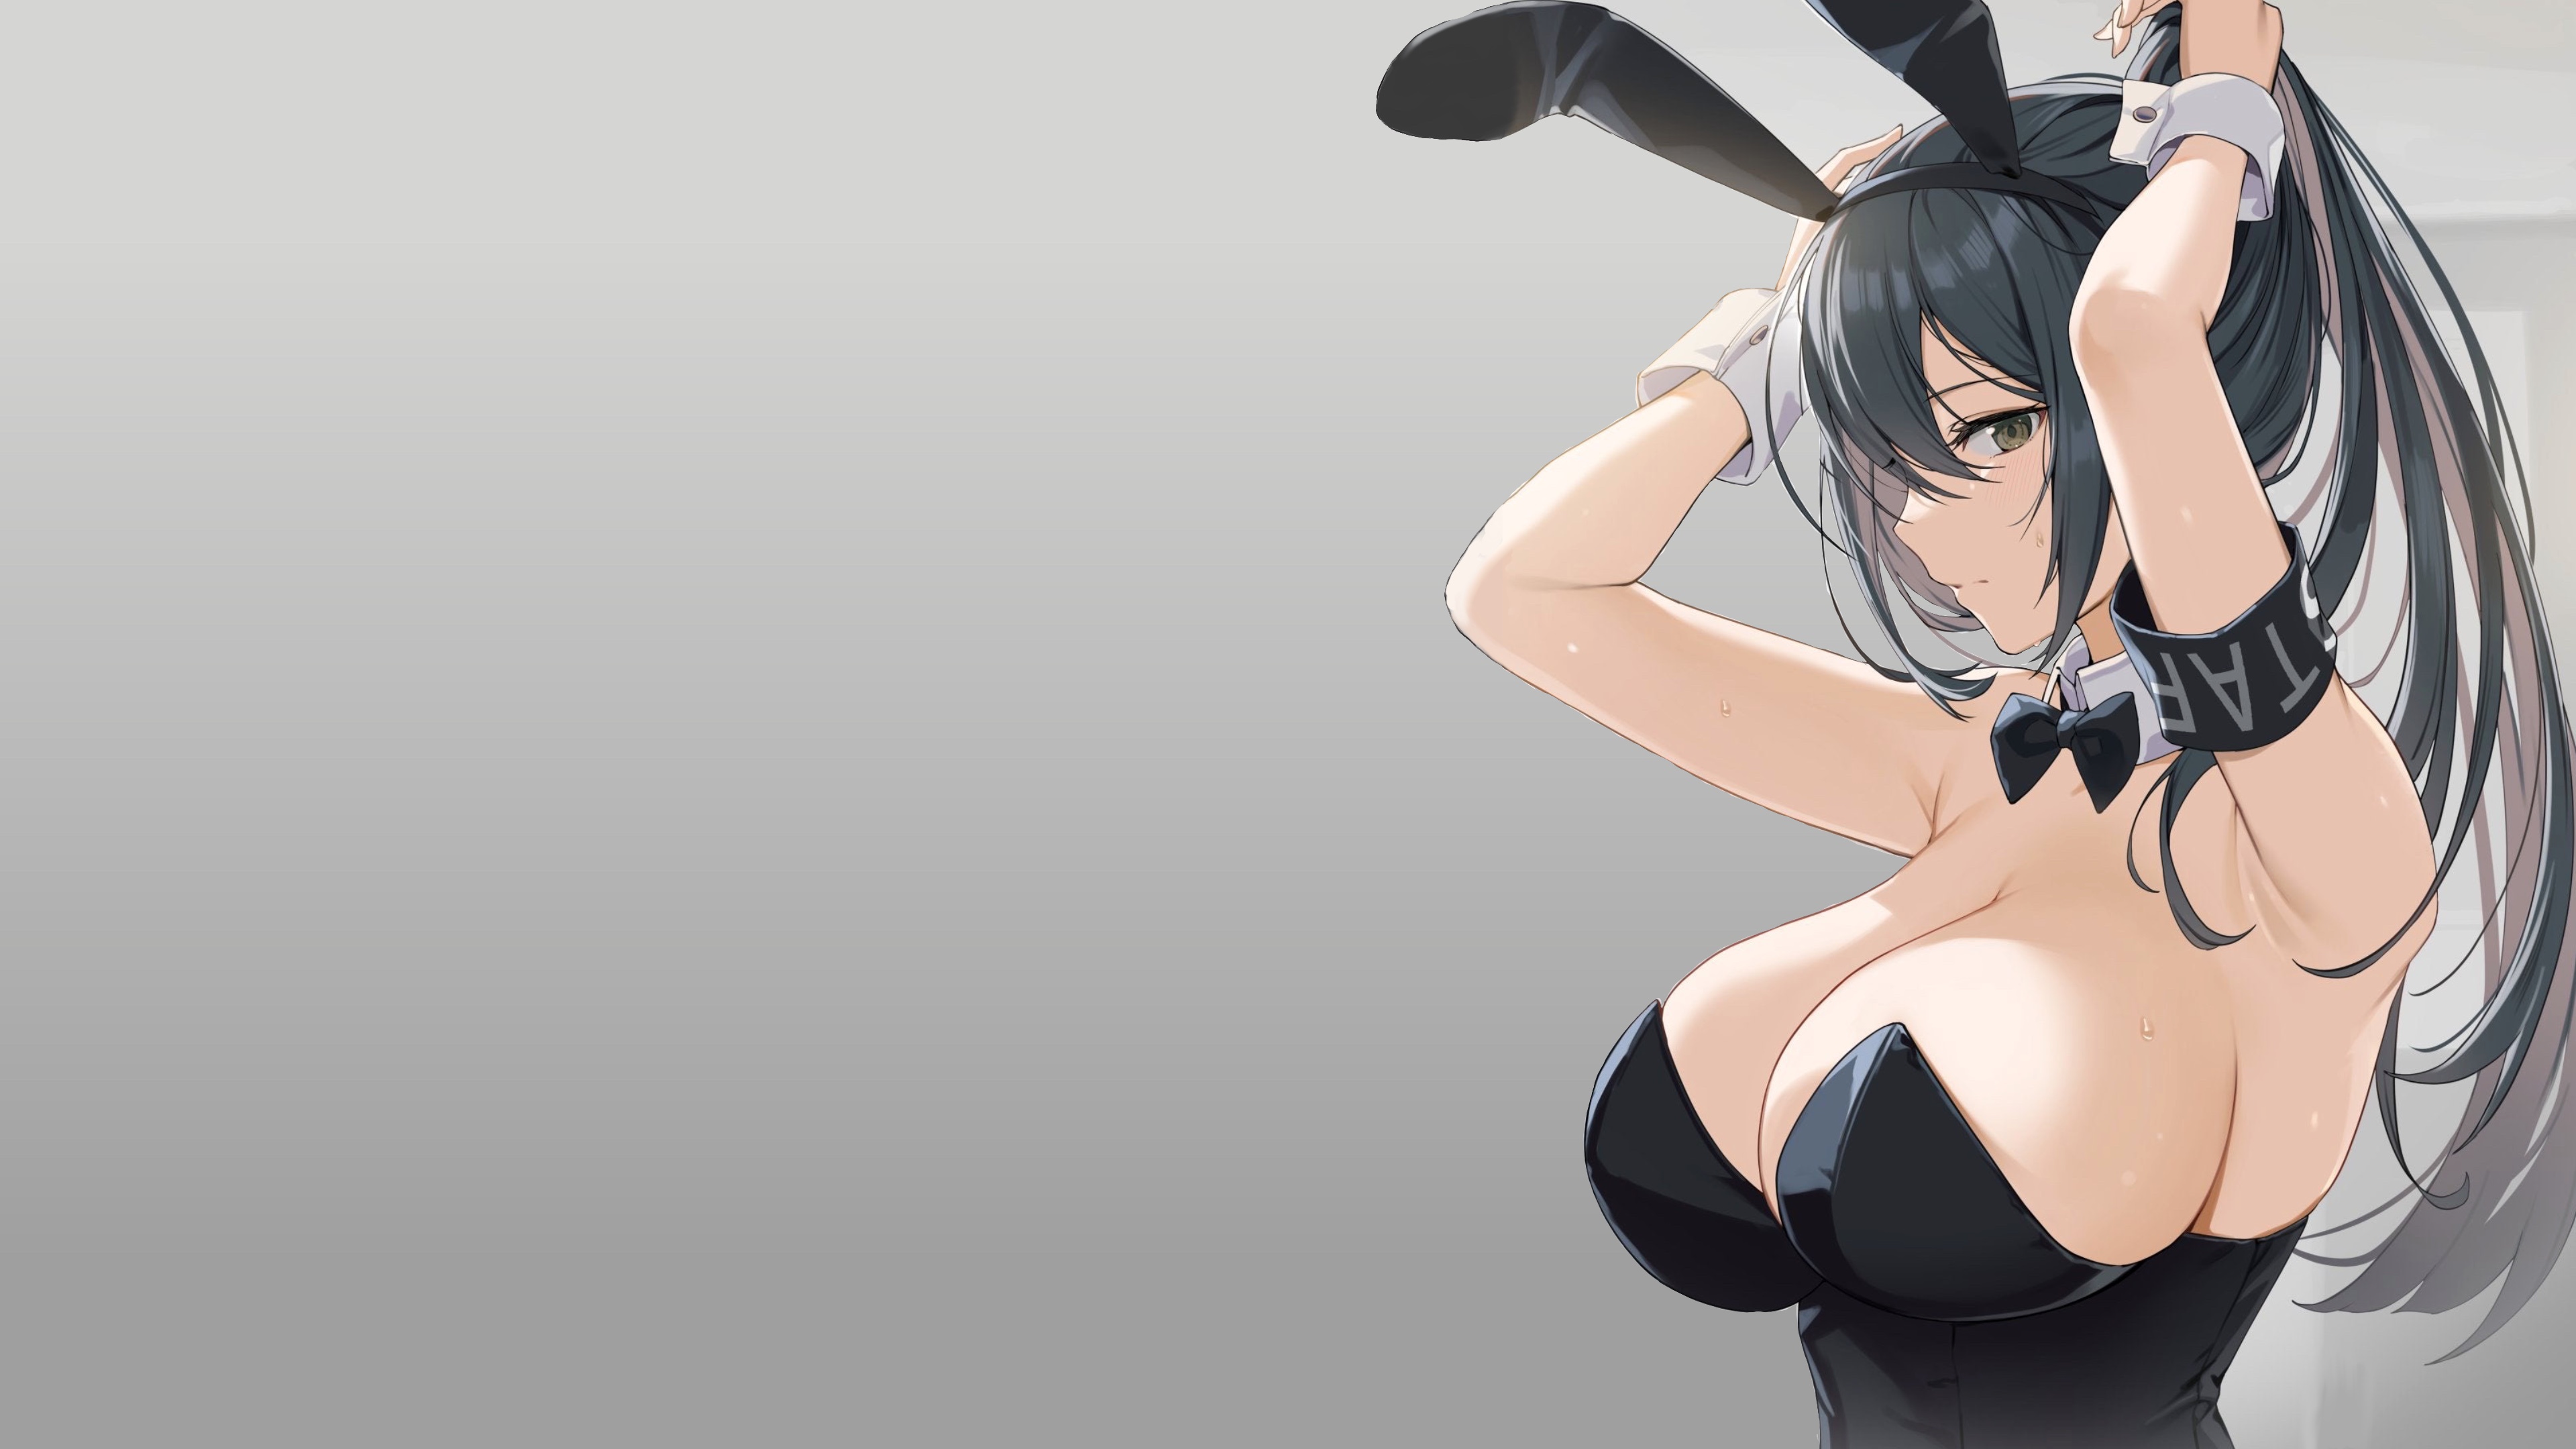 Download wallpaper sexy, black, Anime, boobs, pretty, breasts, big boobs,  bunny, section seinen in resolution 3840x2160